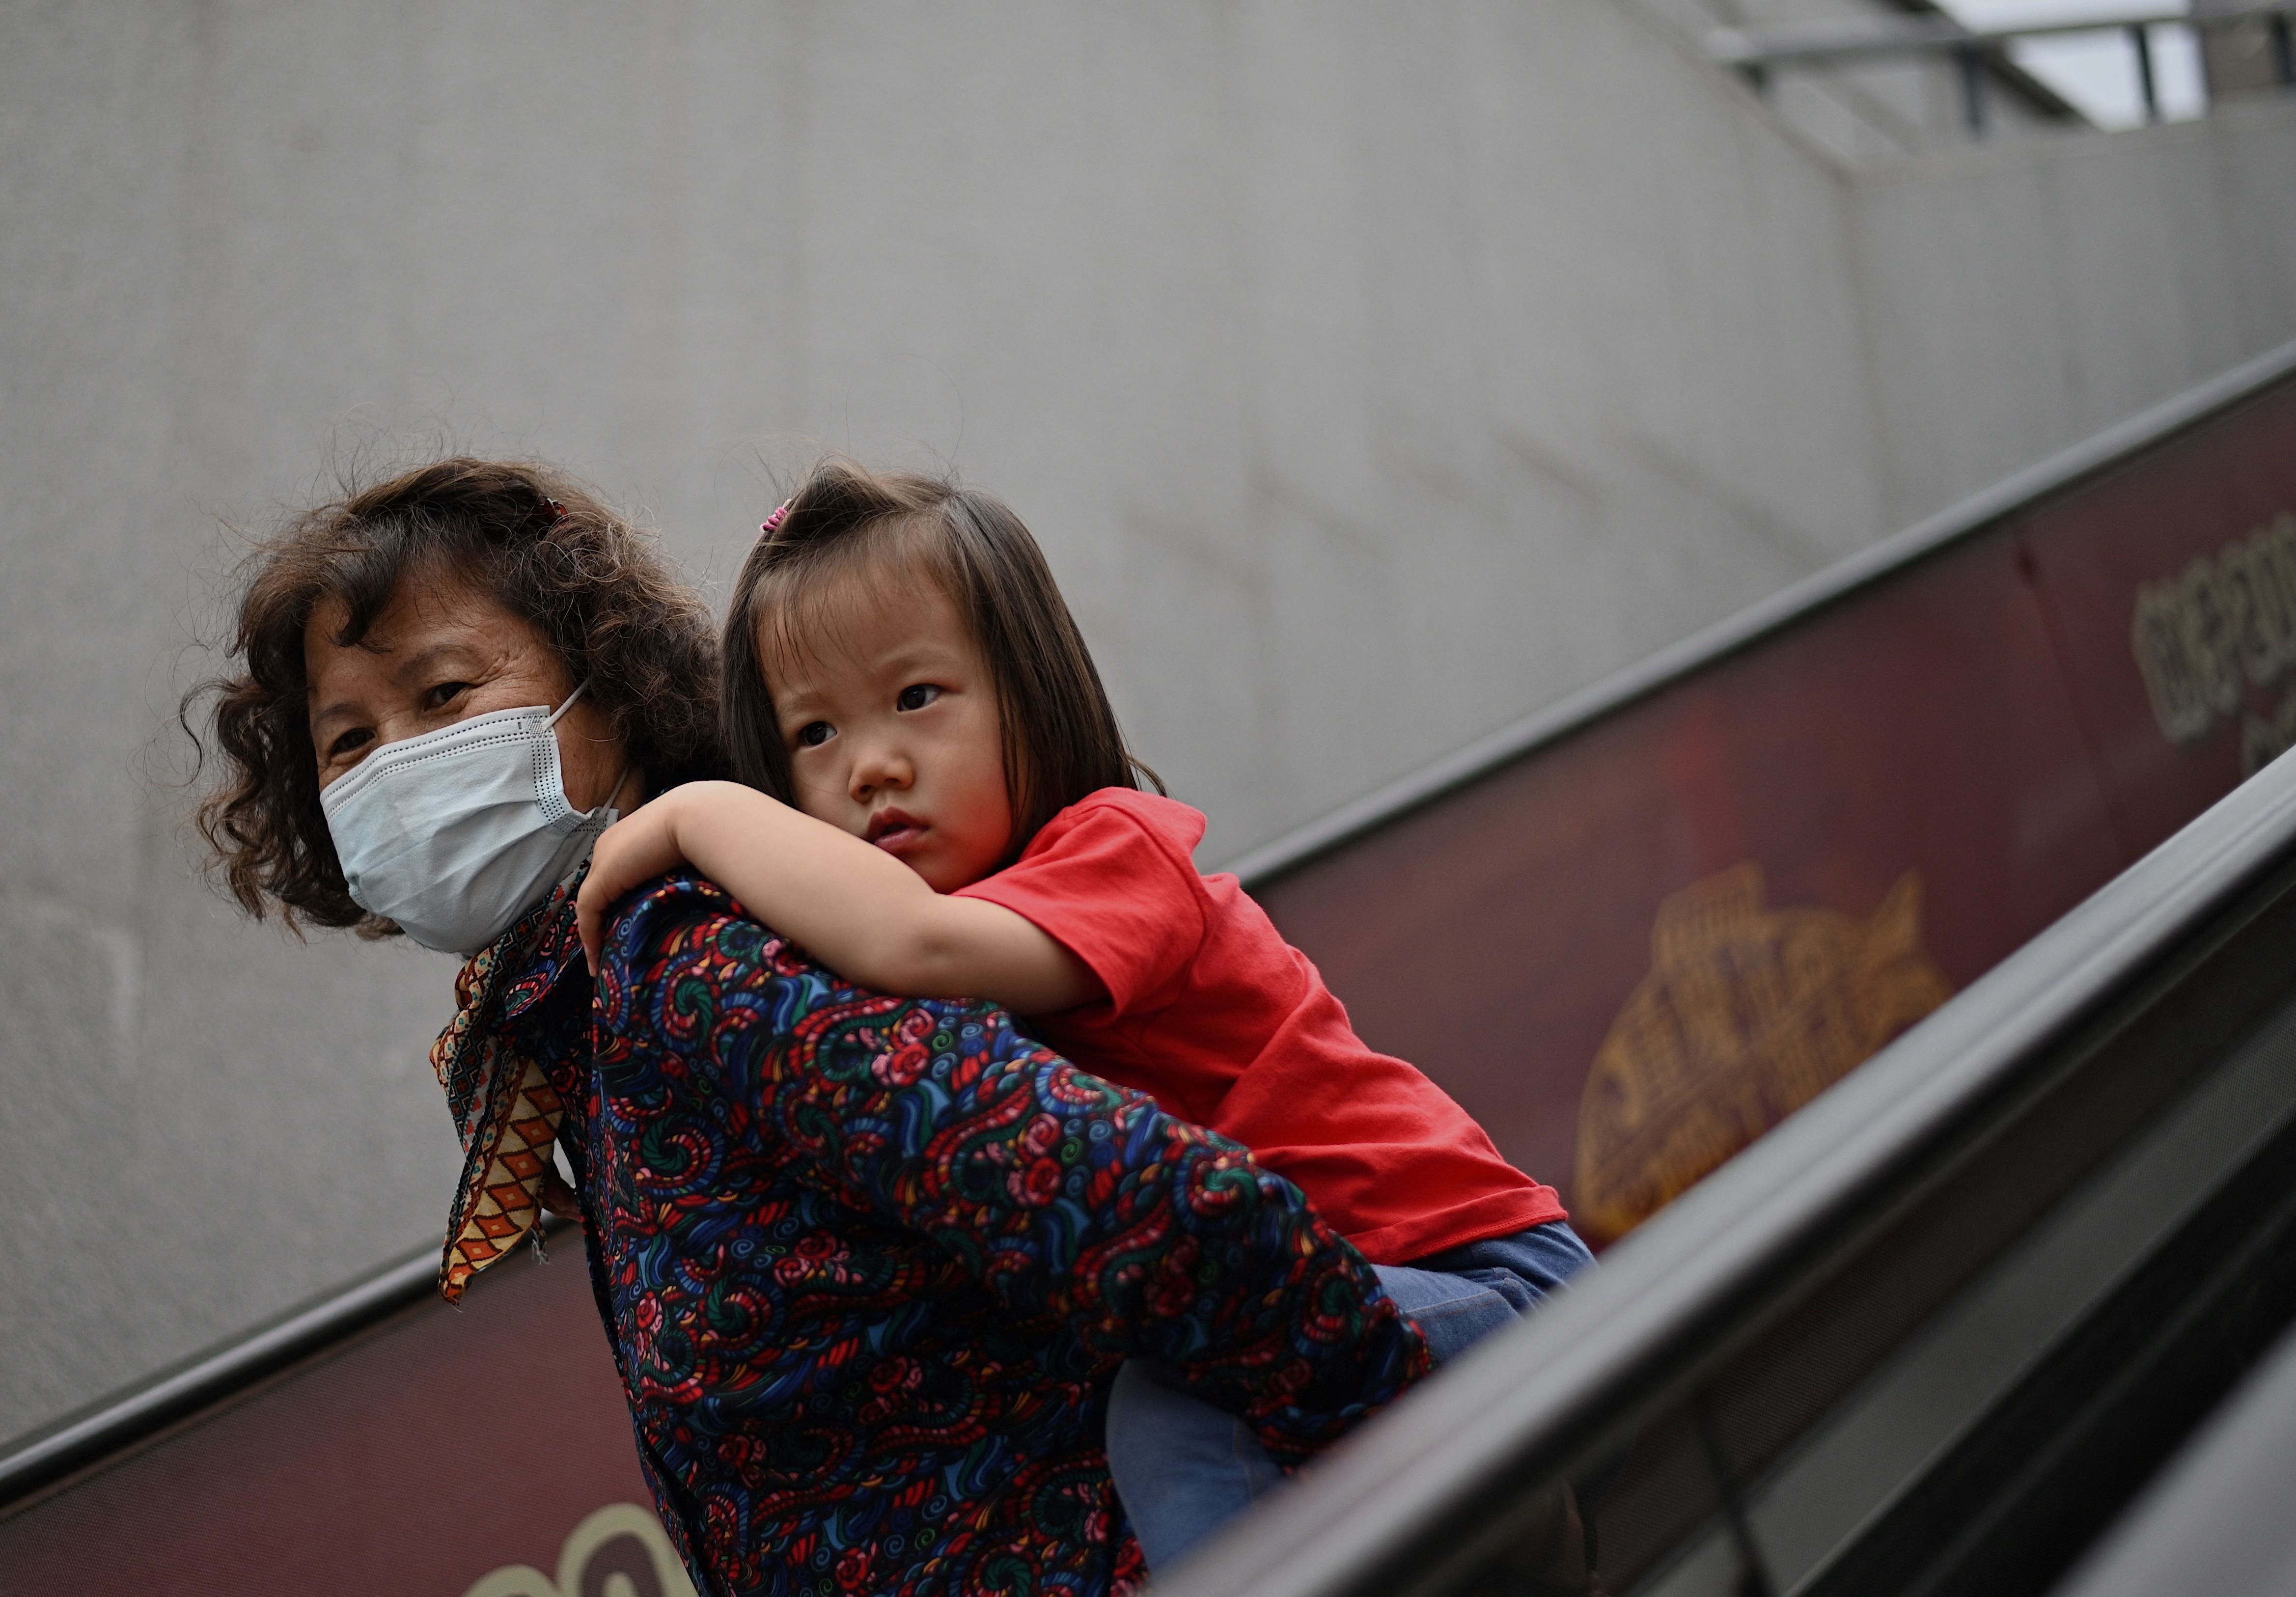 Couples in China will be allowed three children rather than just one